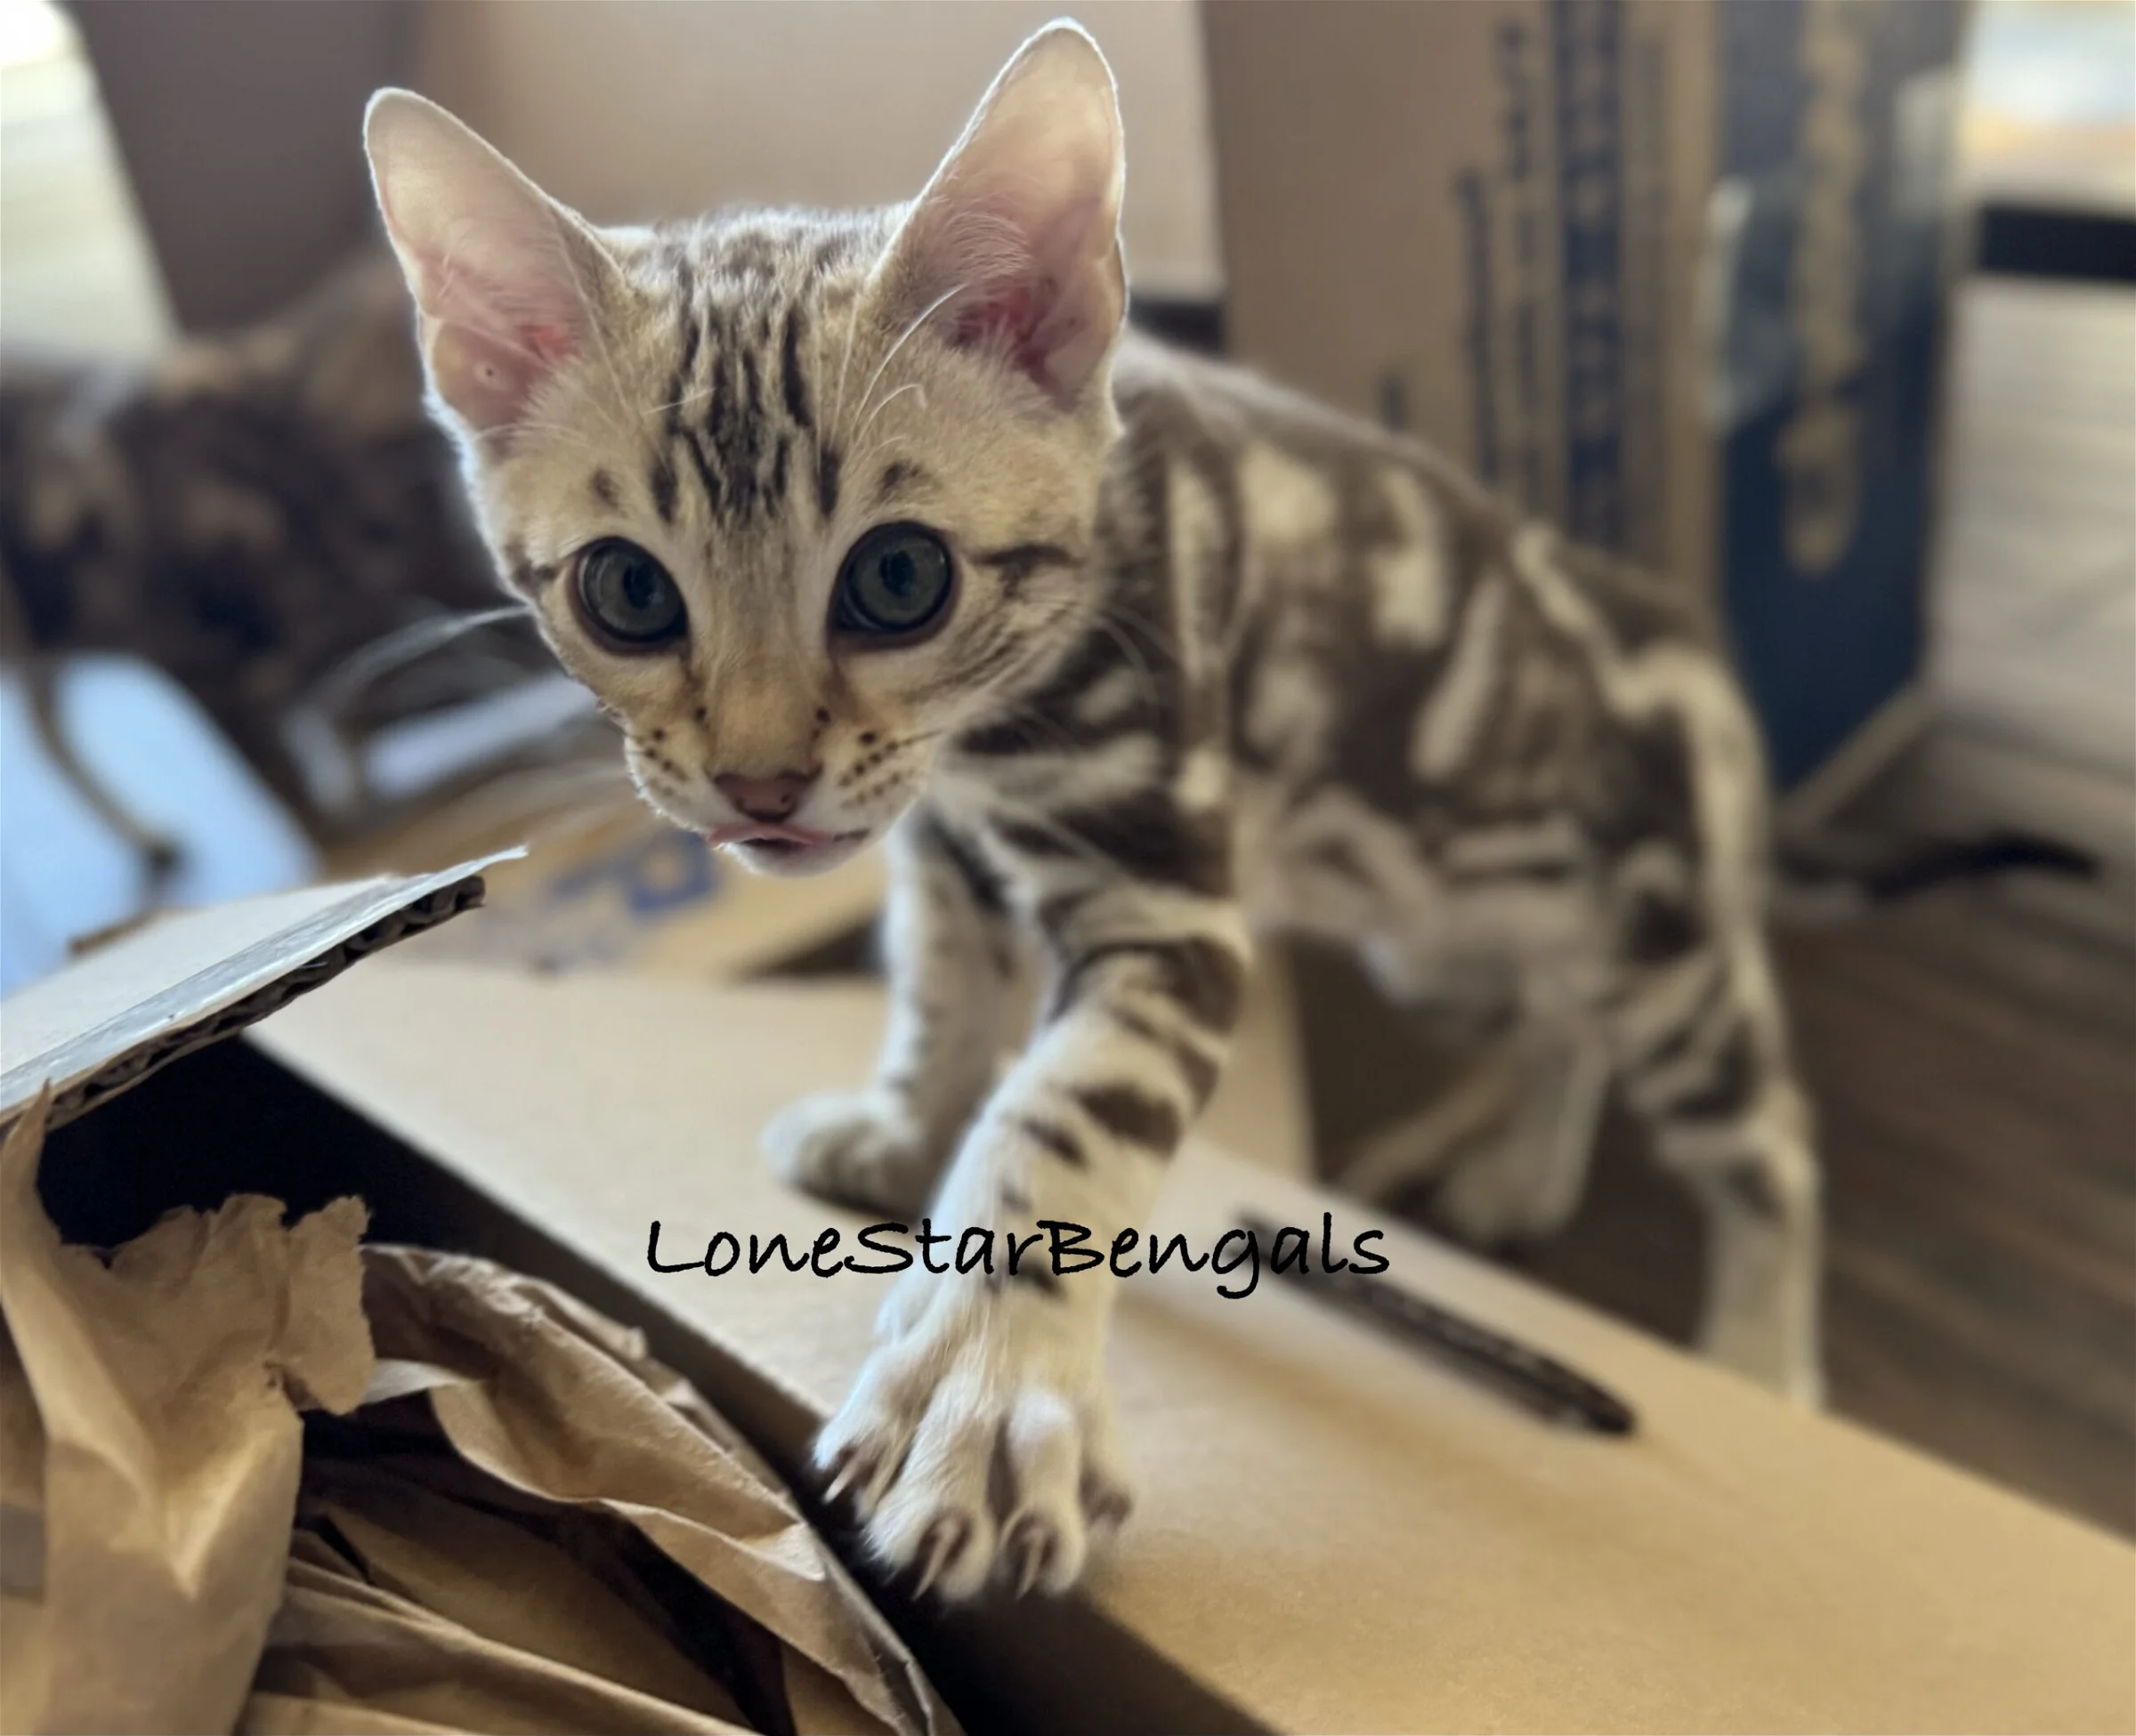 A Bengal kitten from Lone Star Bengal Cats, standing in a cardboard box.